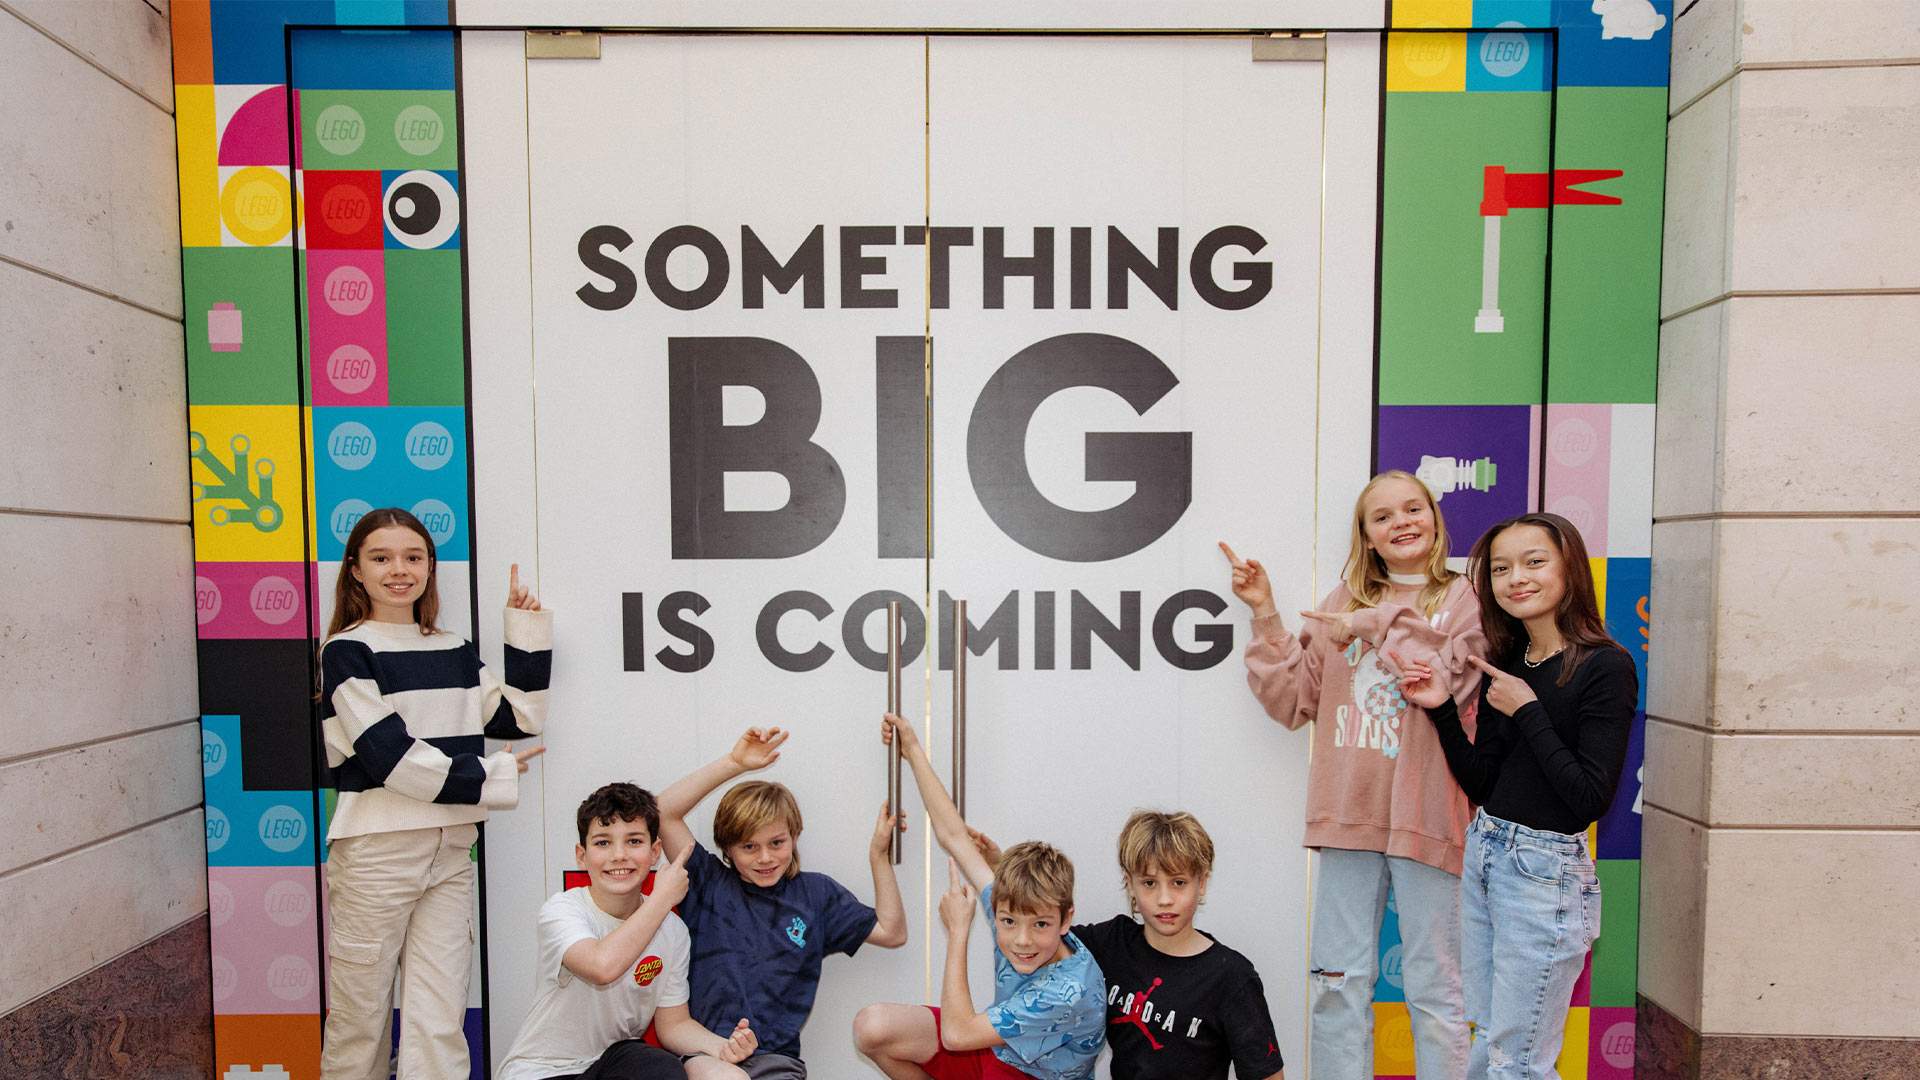 A group of seven kids standing outside Sydney's lego store in front of a sign that says "something big is coming".